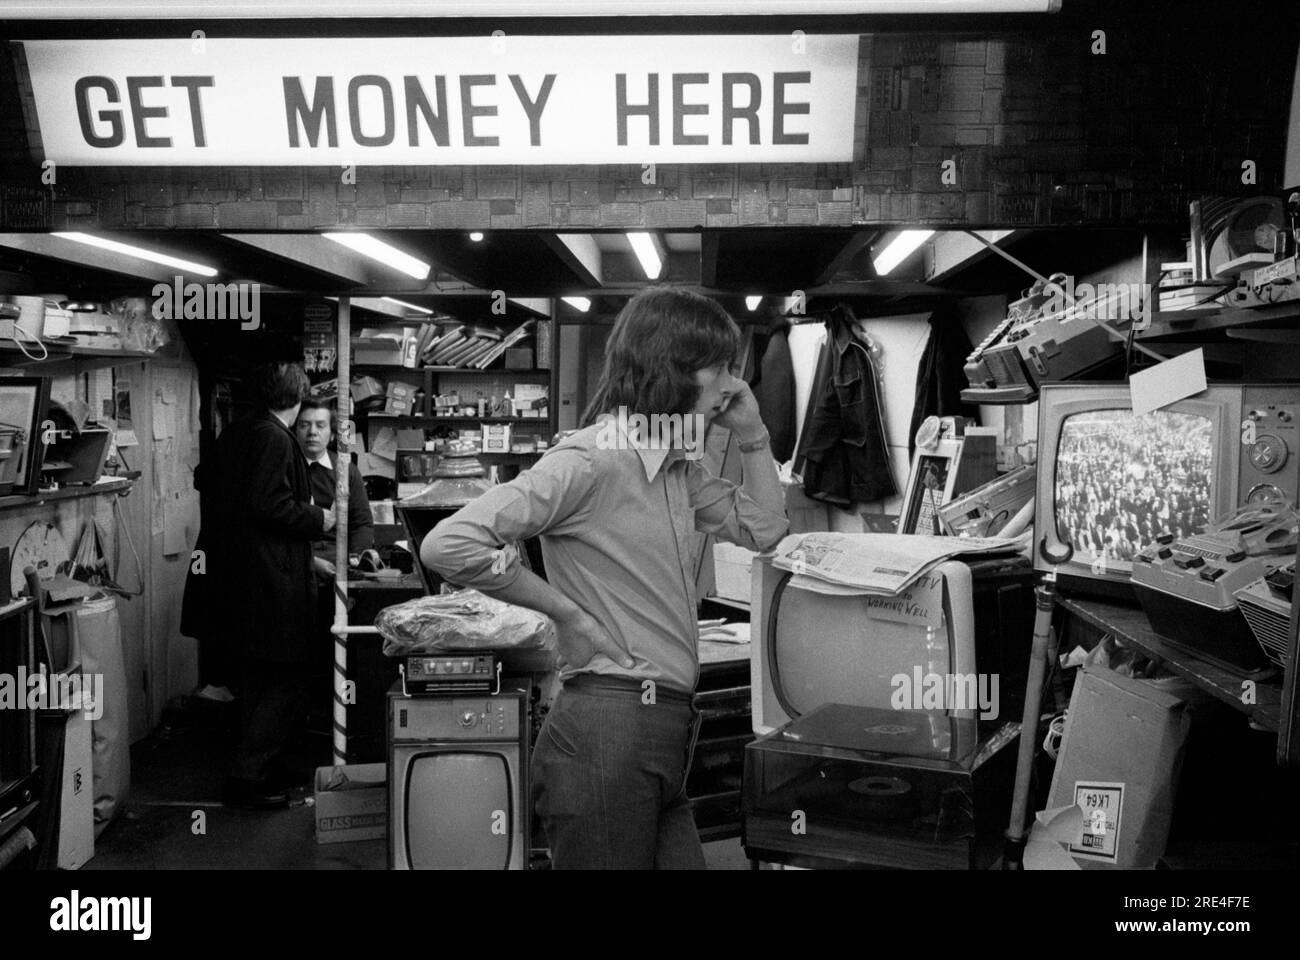 1970s television and radio repair secondhand shop UK. The sign reads 'Get Money Here' they also bought and sold secondhand TV sets, and other household electrical appliances, as well as repairing broken stuff . The man watching the TV is a salesman. Queensway, London. 1972  England HOMER SYKES Stock Photo